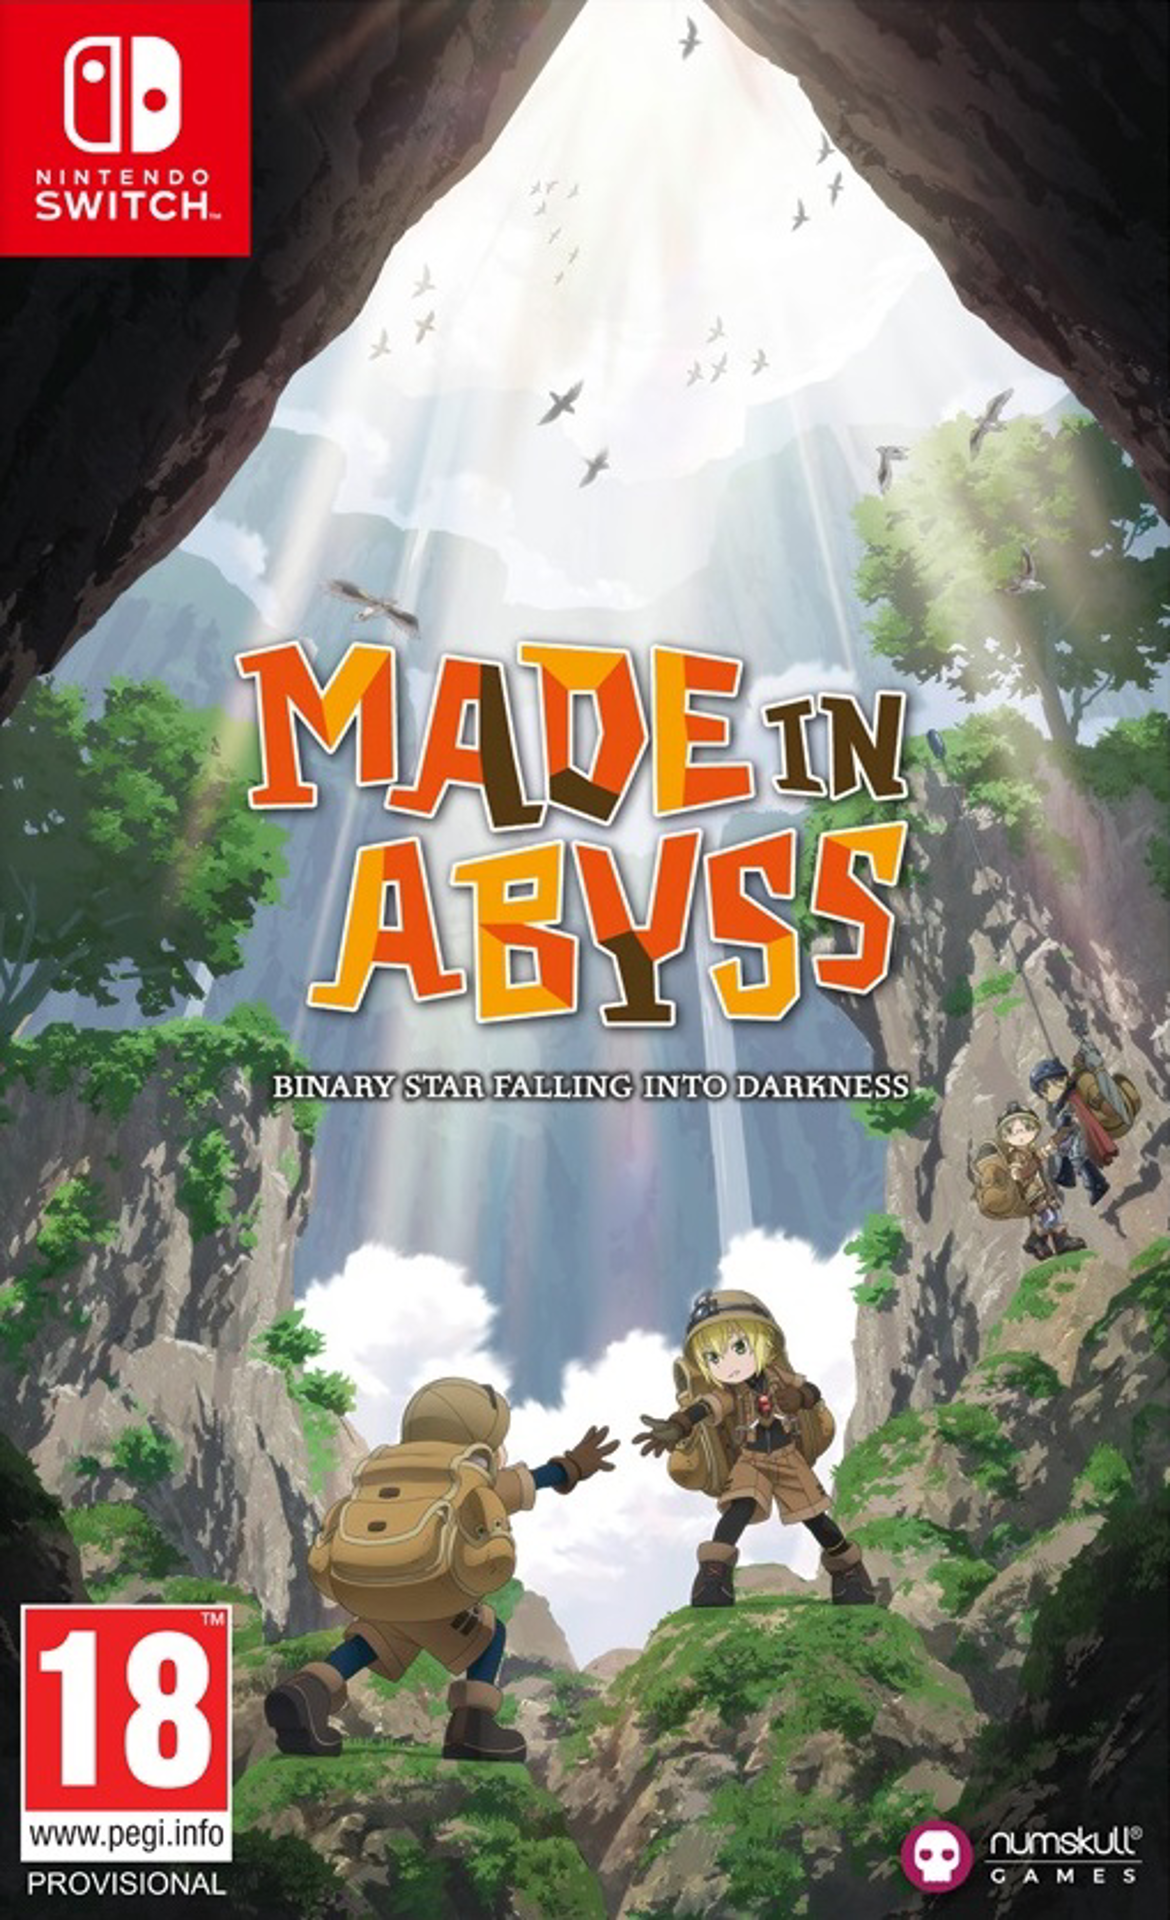 Made in Abyss : Binary Star Falling into Darkness